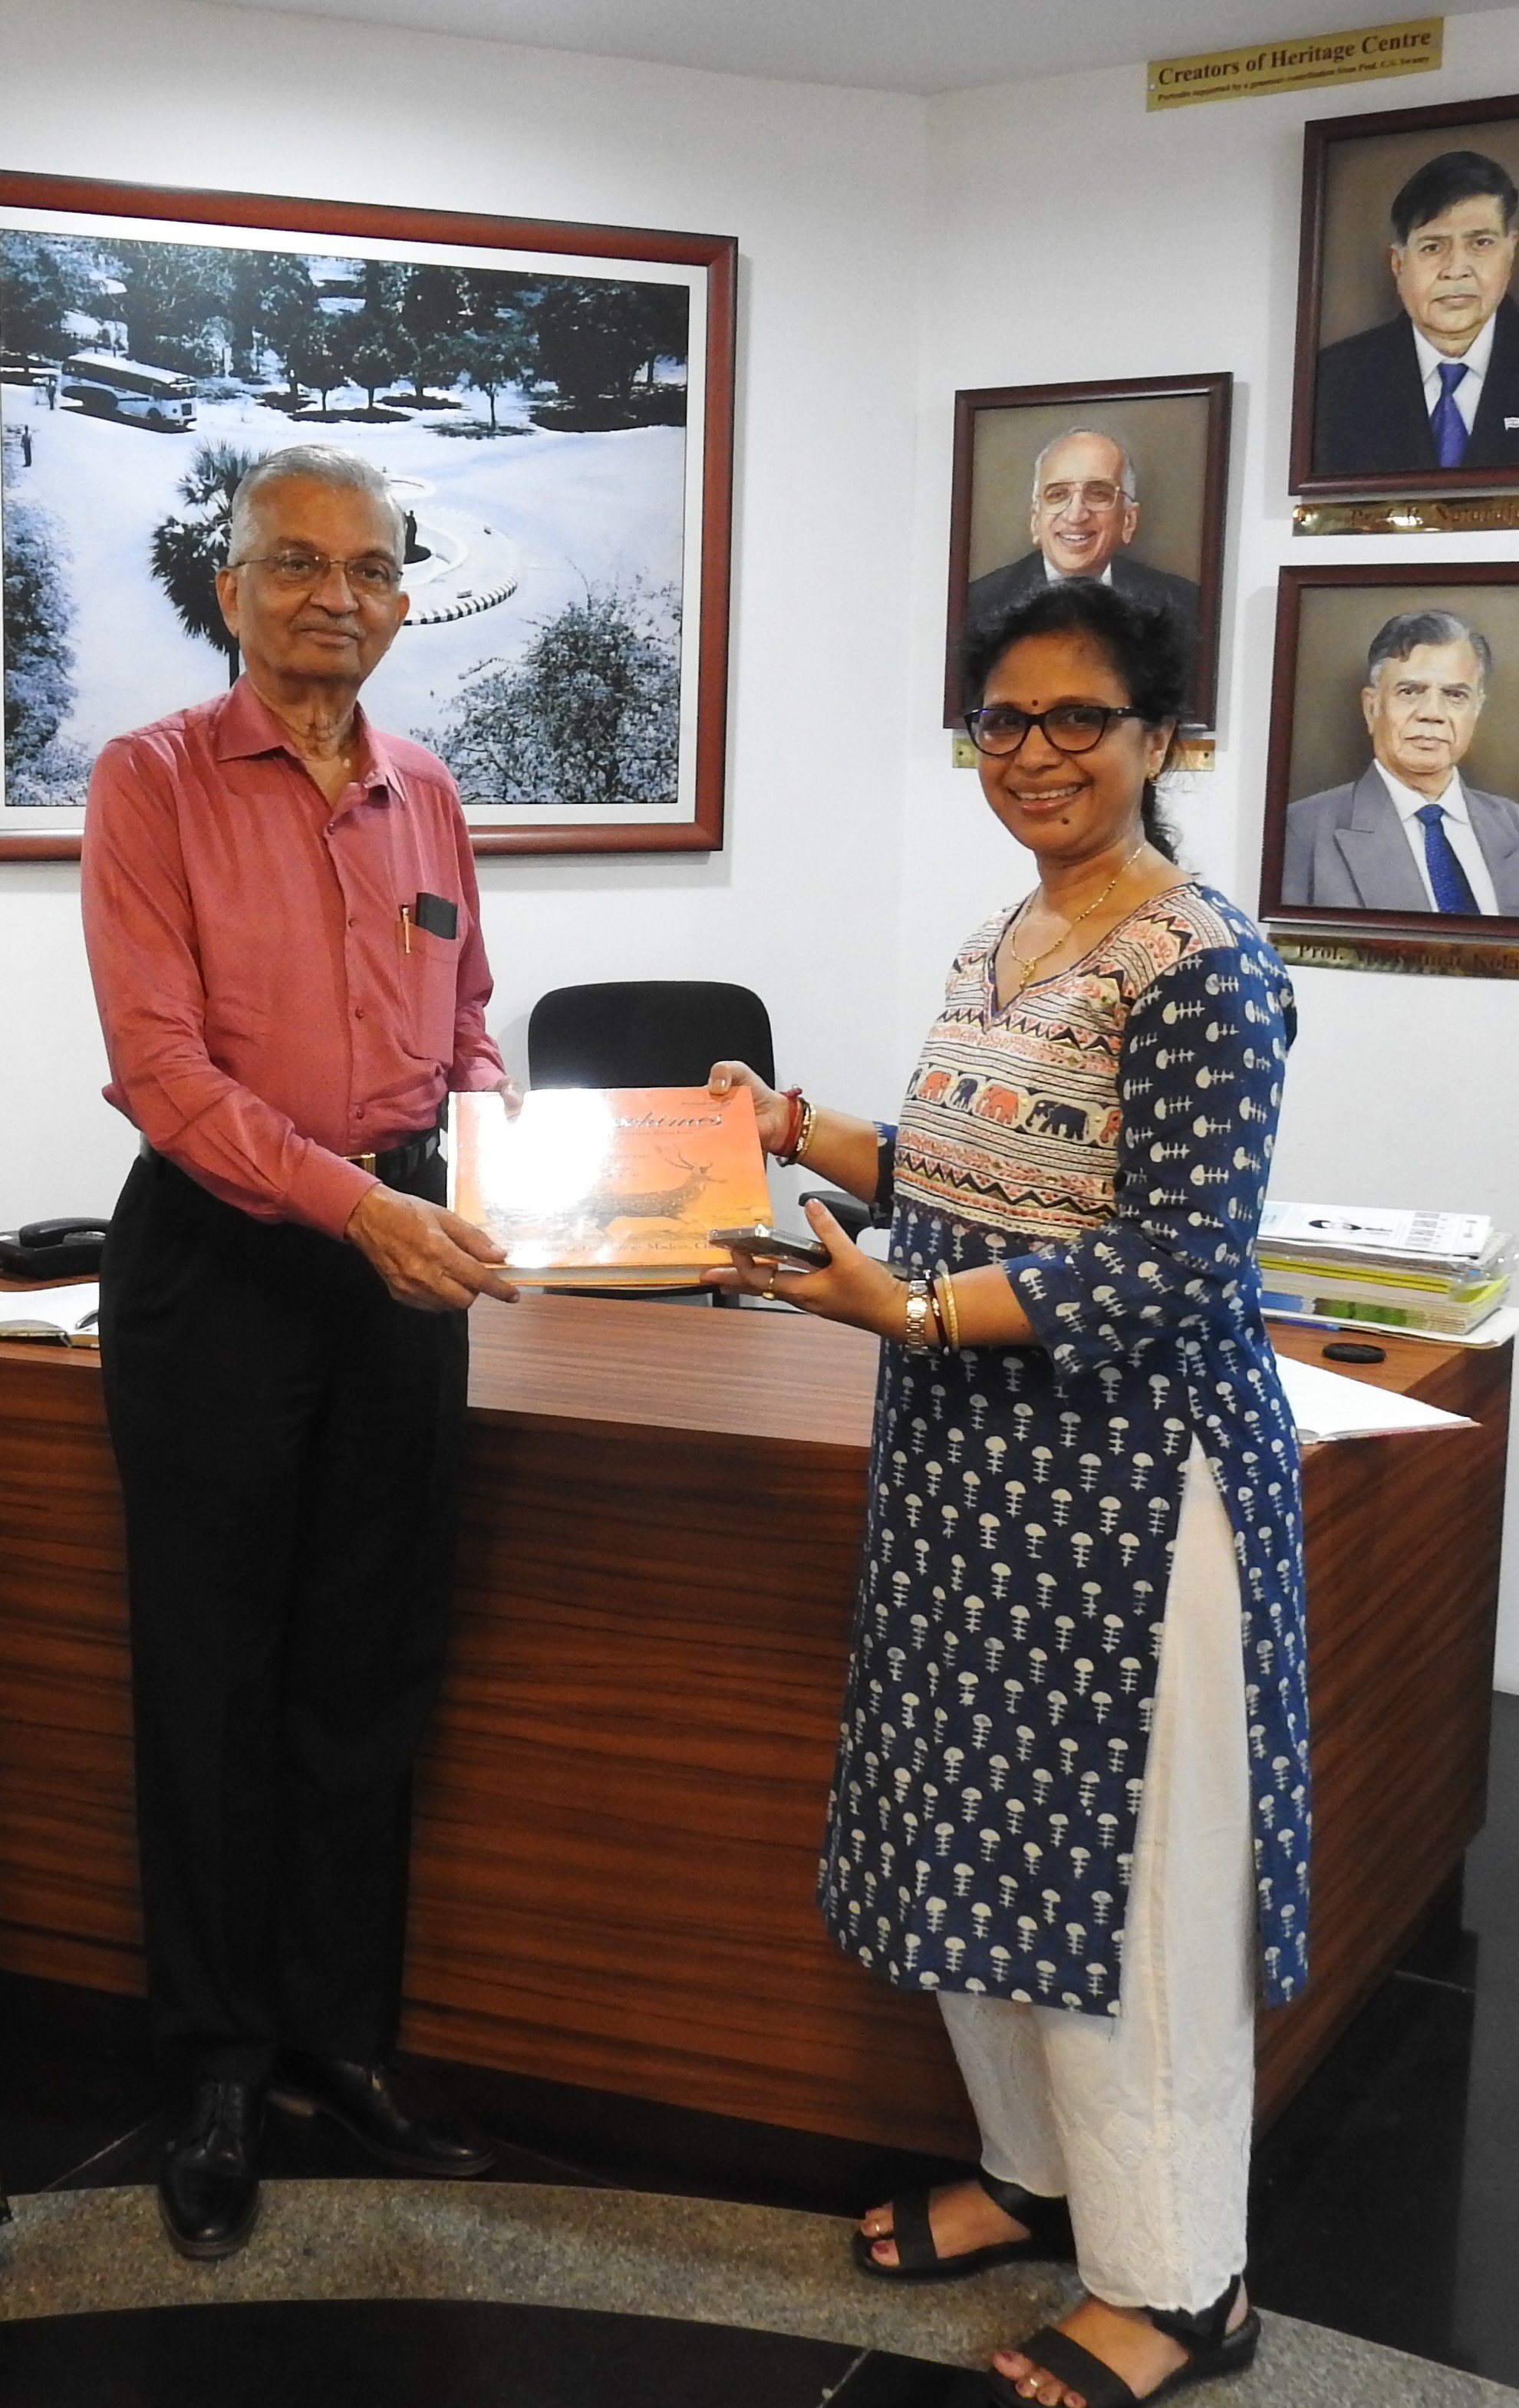 Dr. Kakodkar is presented Campaschimes, an IITM history book, by Ms. Mamata Dash (Senior Project Officer, Heritage Centre)